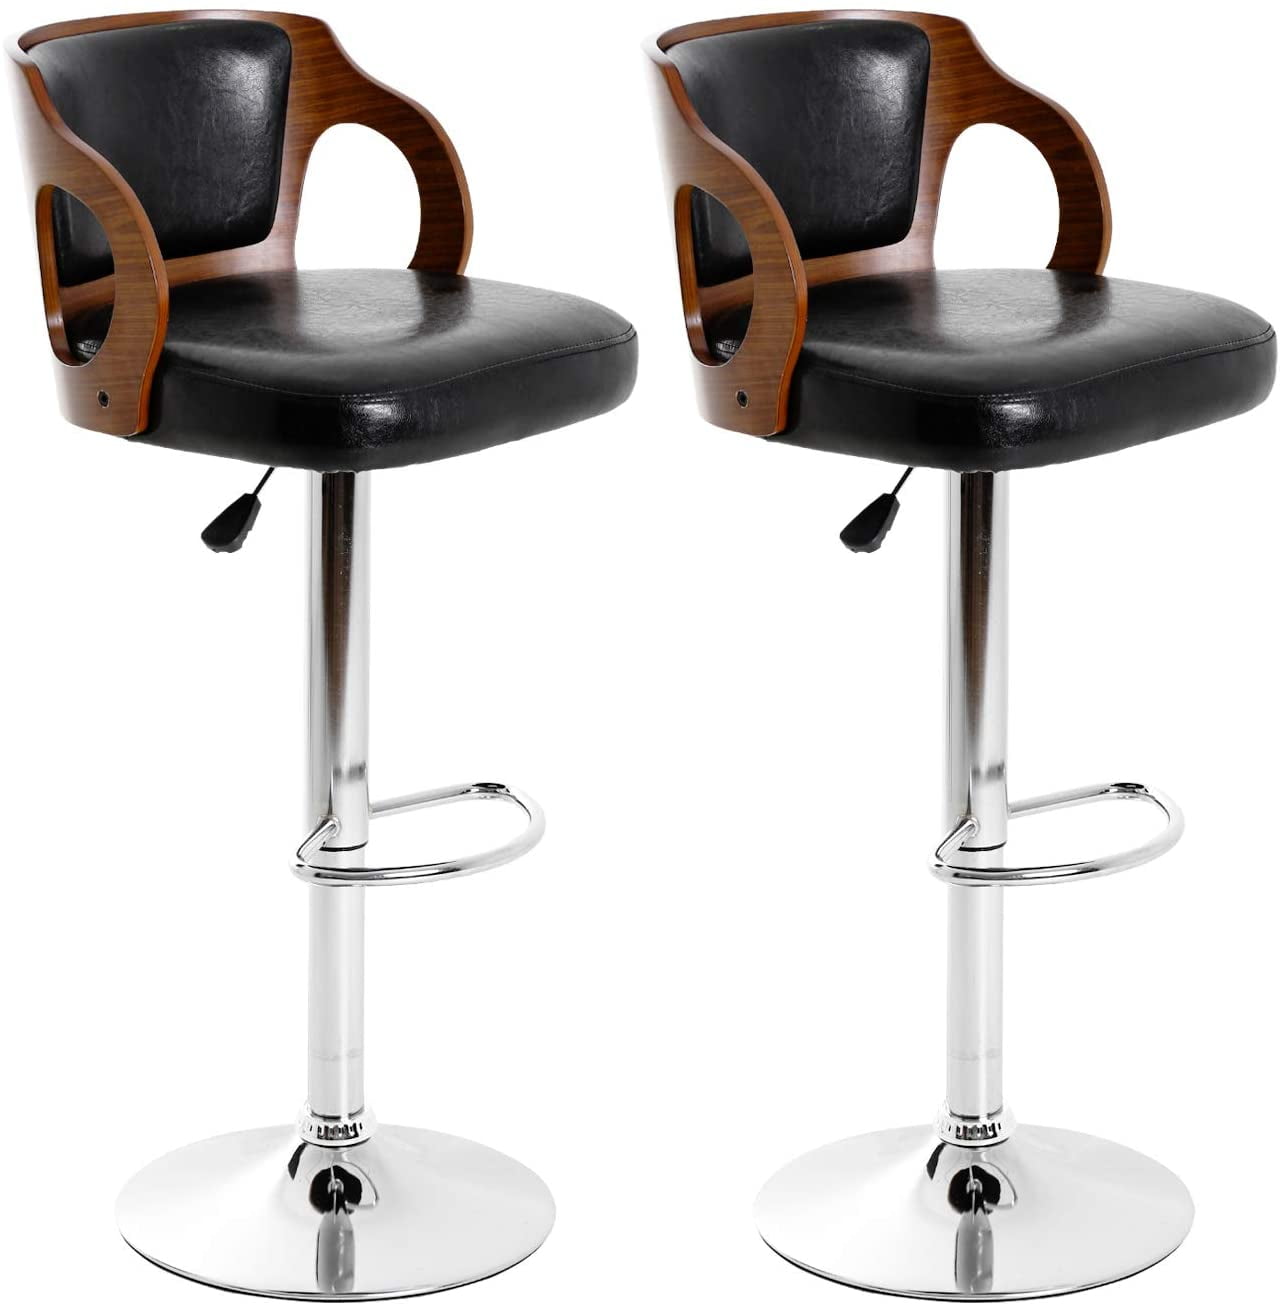 Modern Set of 2 Bar Stools Leather Adjustable Swivel Pub Chair In Multi Colors 